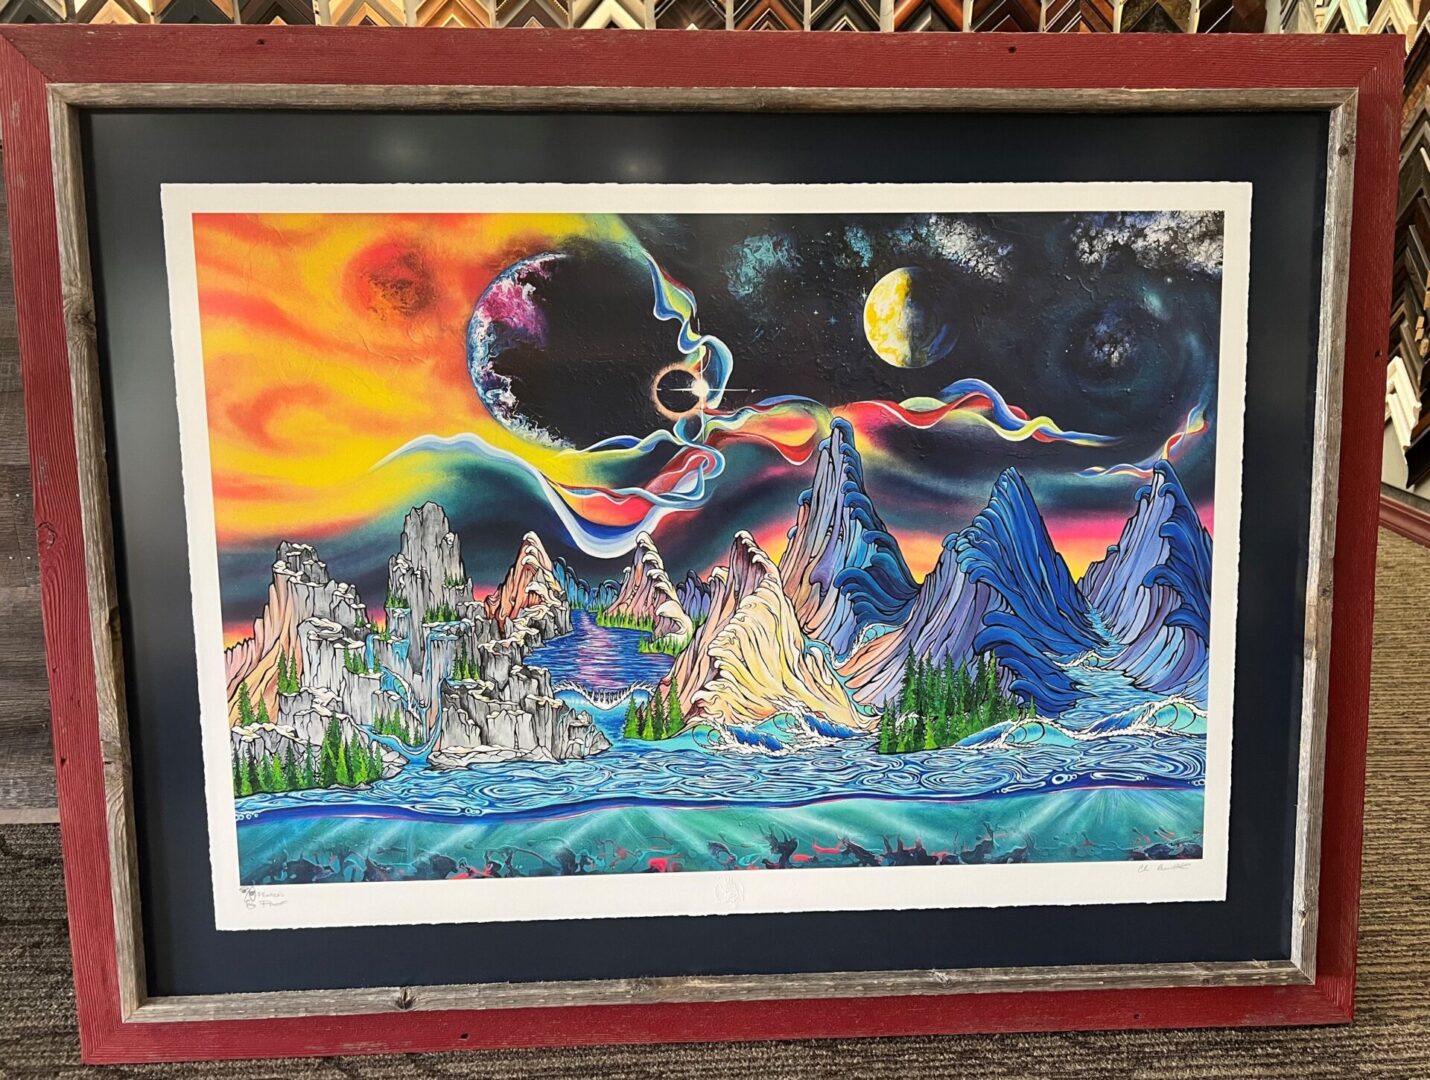 A painting of a mountain scene with a rainbow.